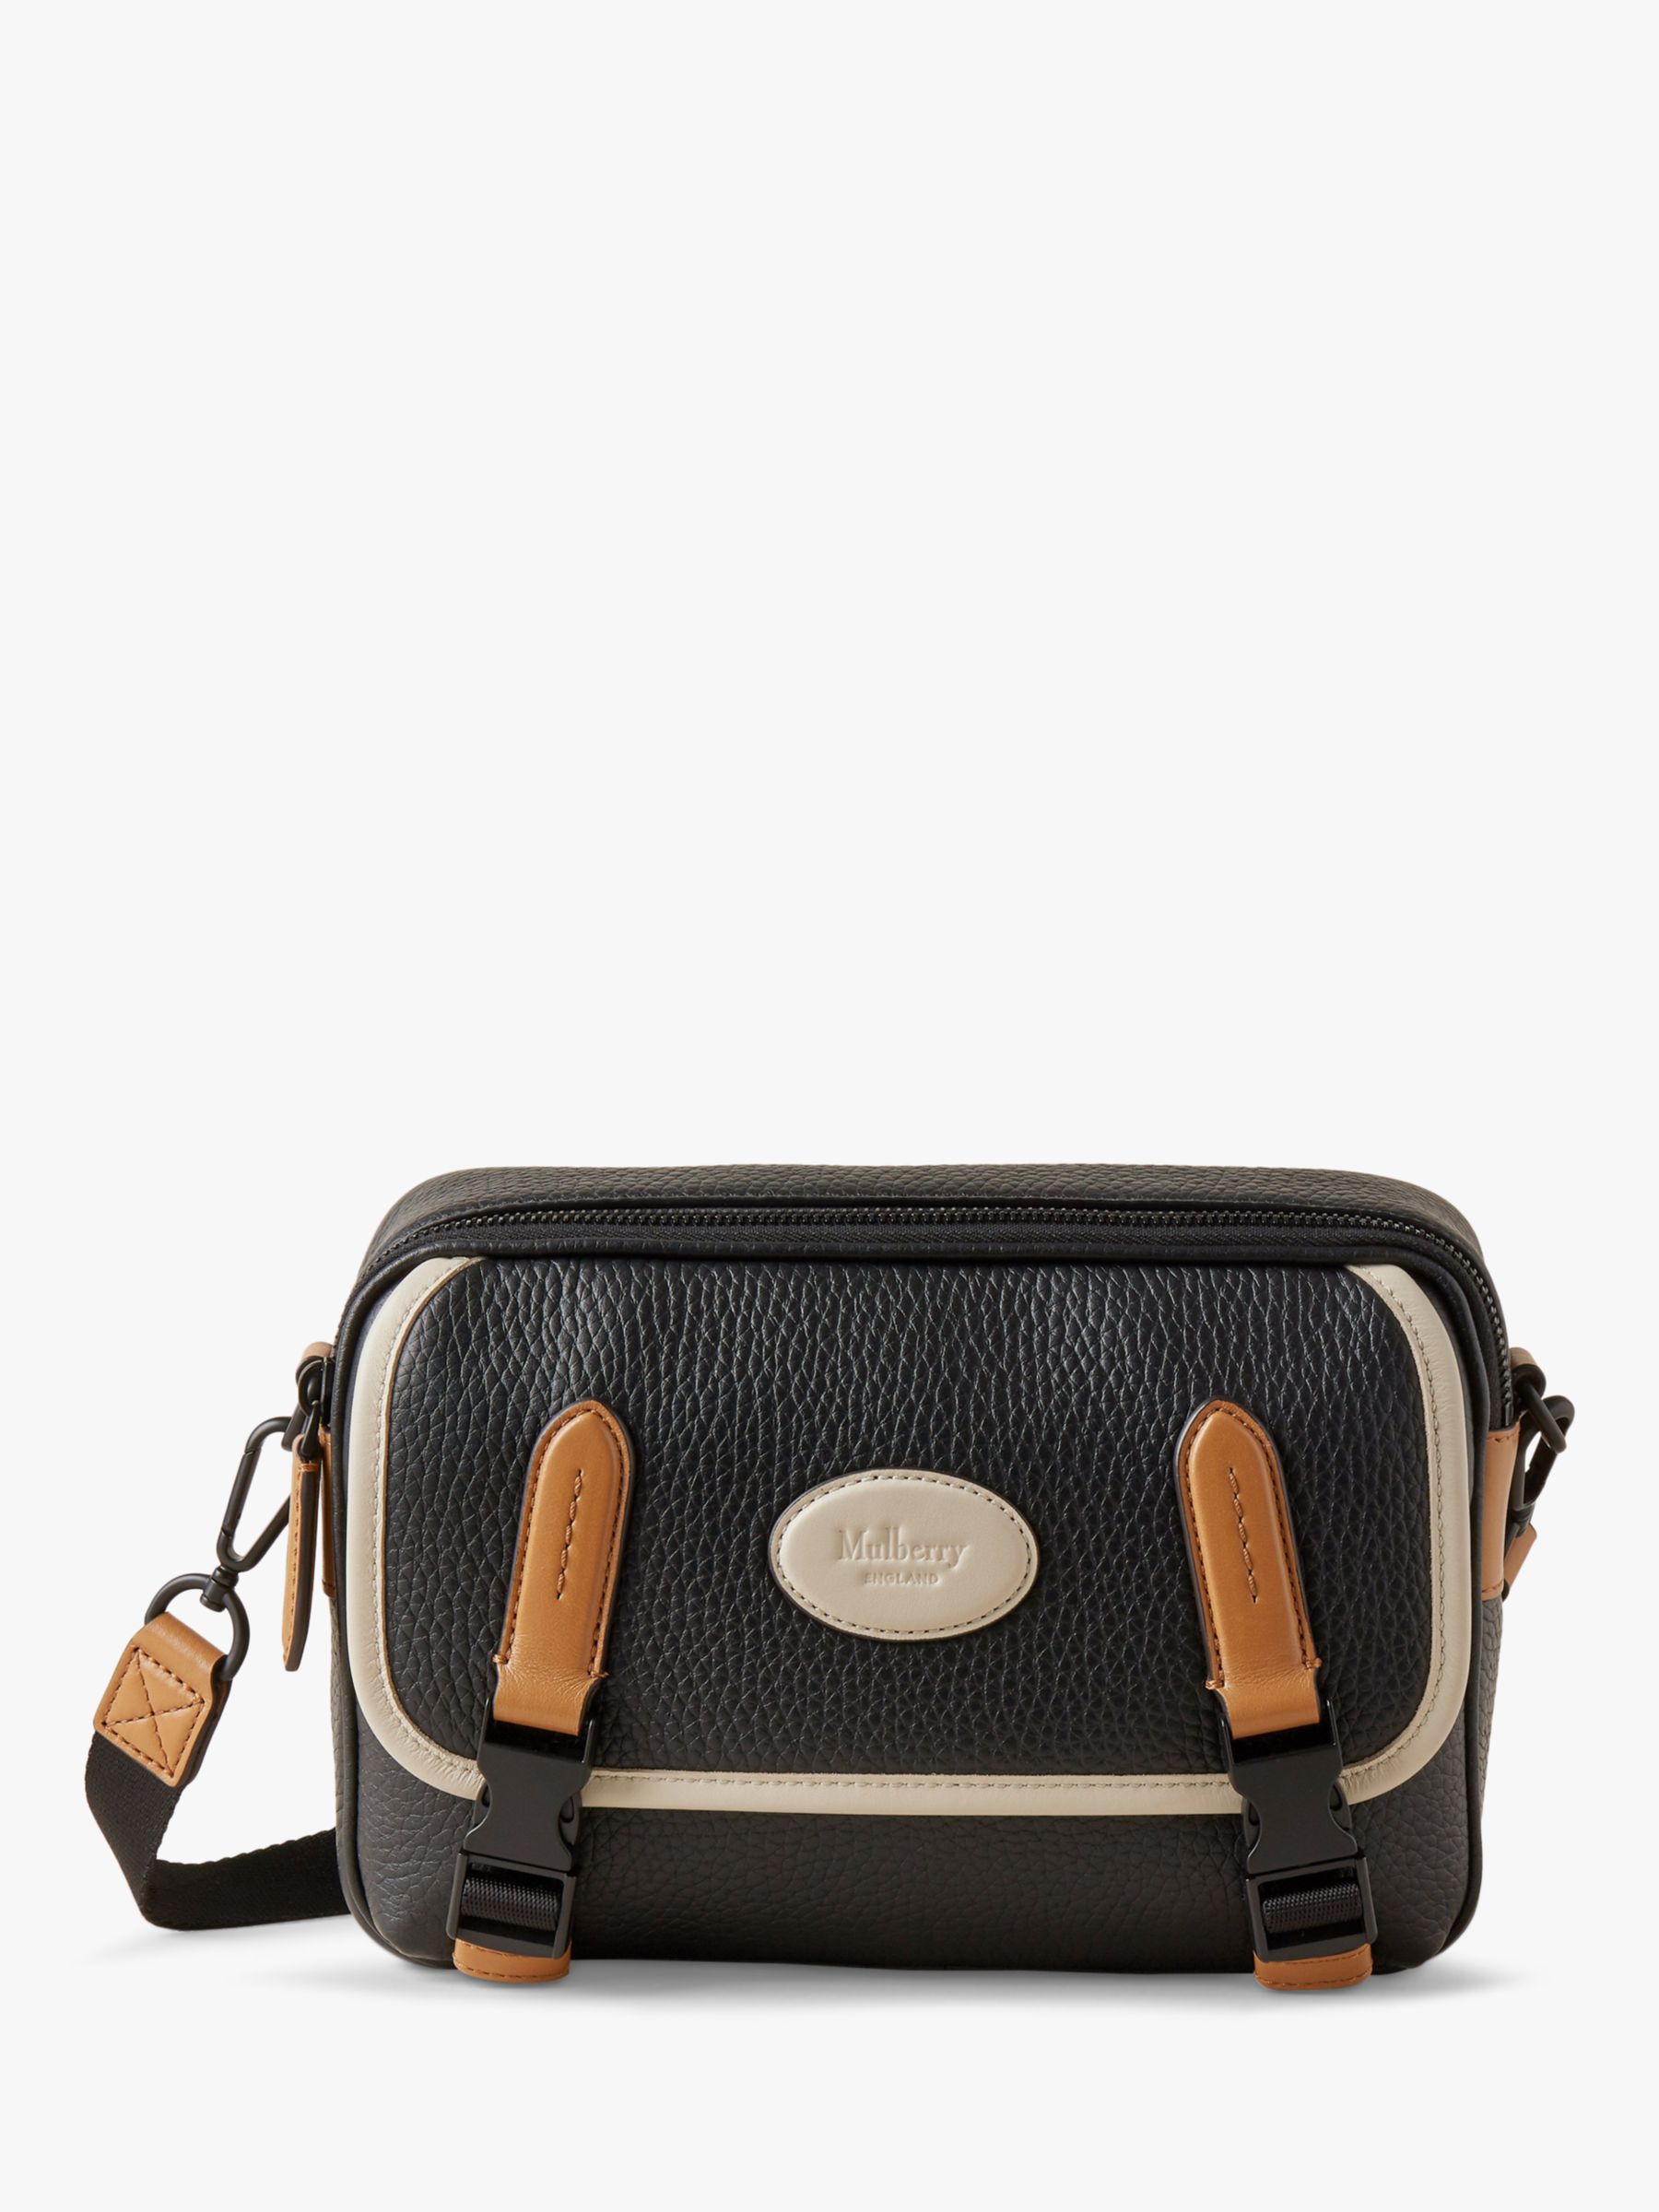 Mulberry Heritage Heavy Grain Leather Messenger Bag, Black/Sable at ...